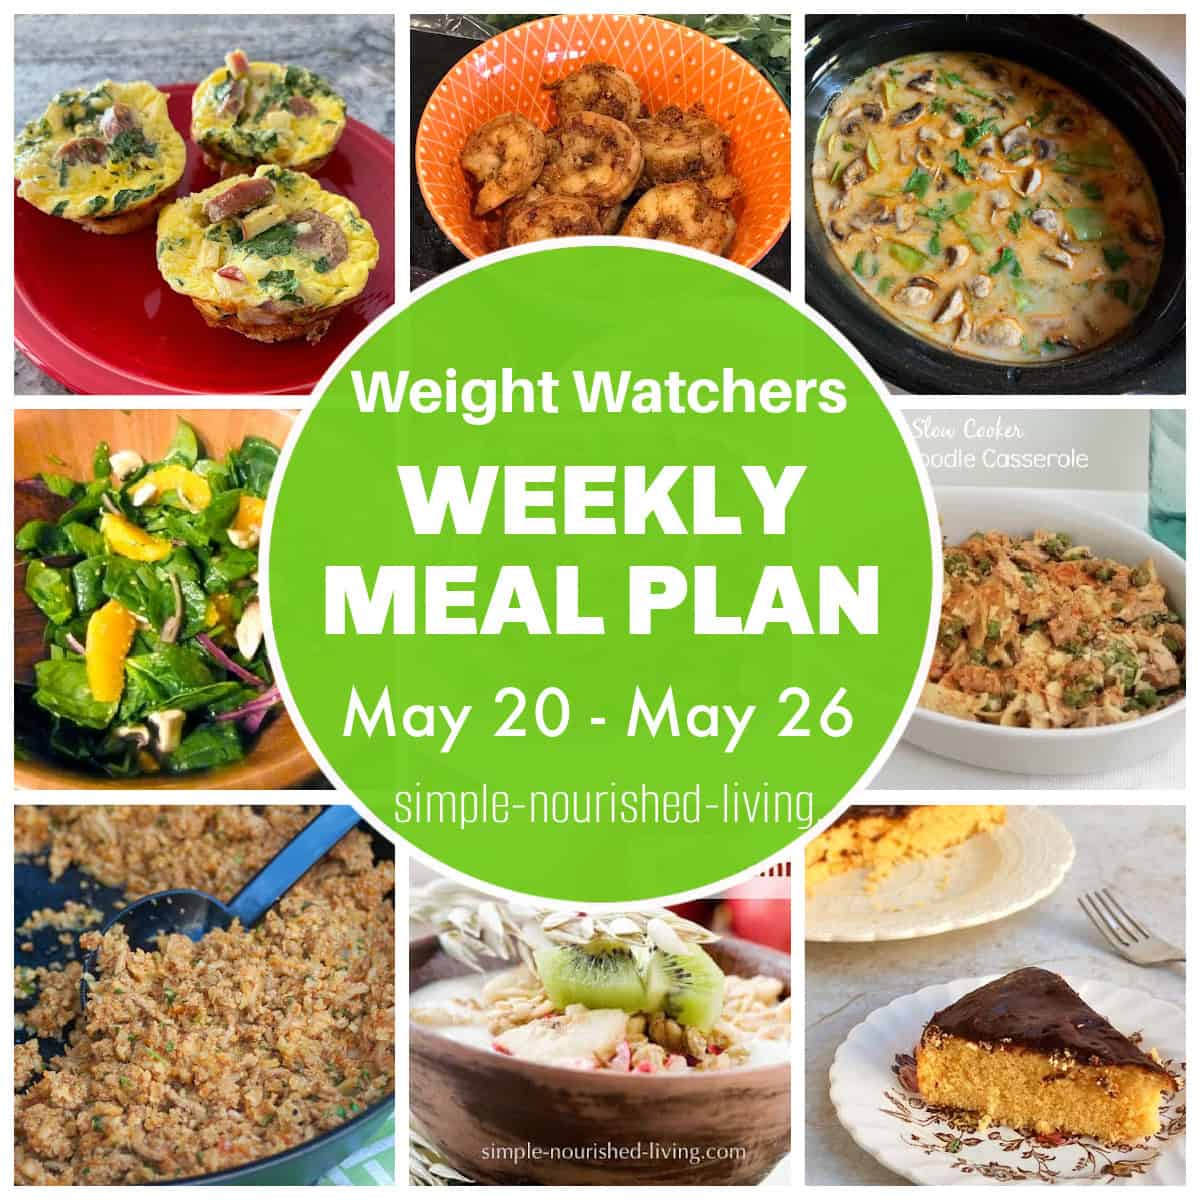 Weight Watchers Weekly Meal Plan Might 22- Might 28